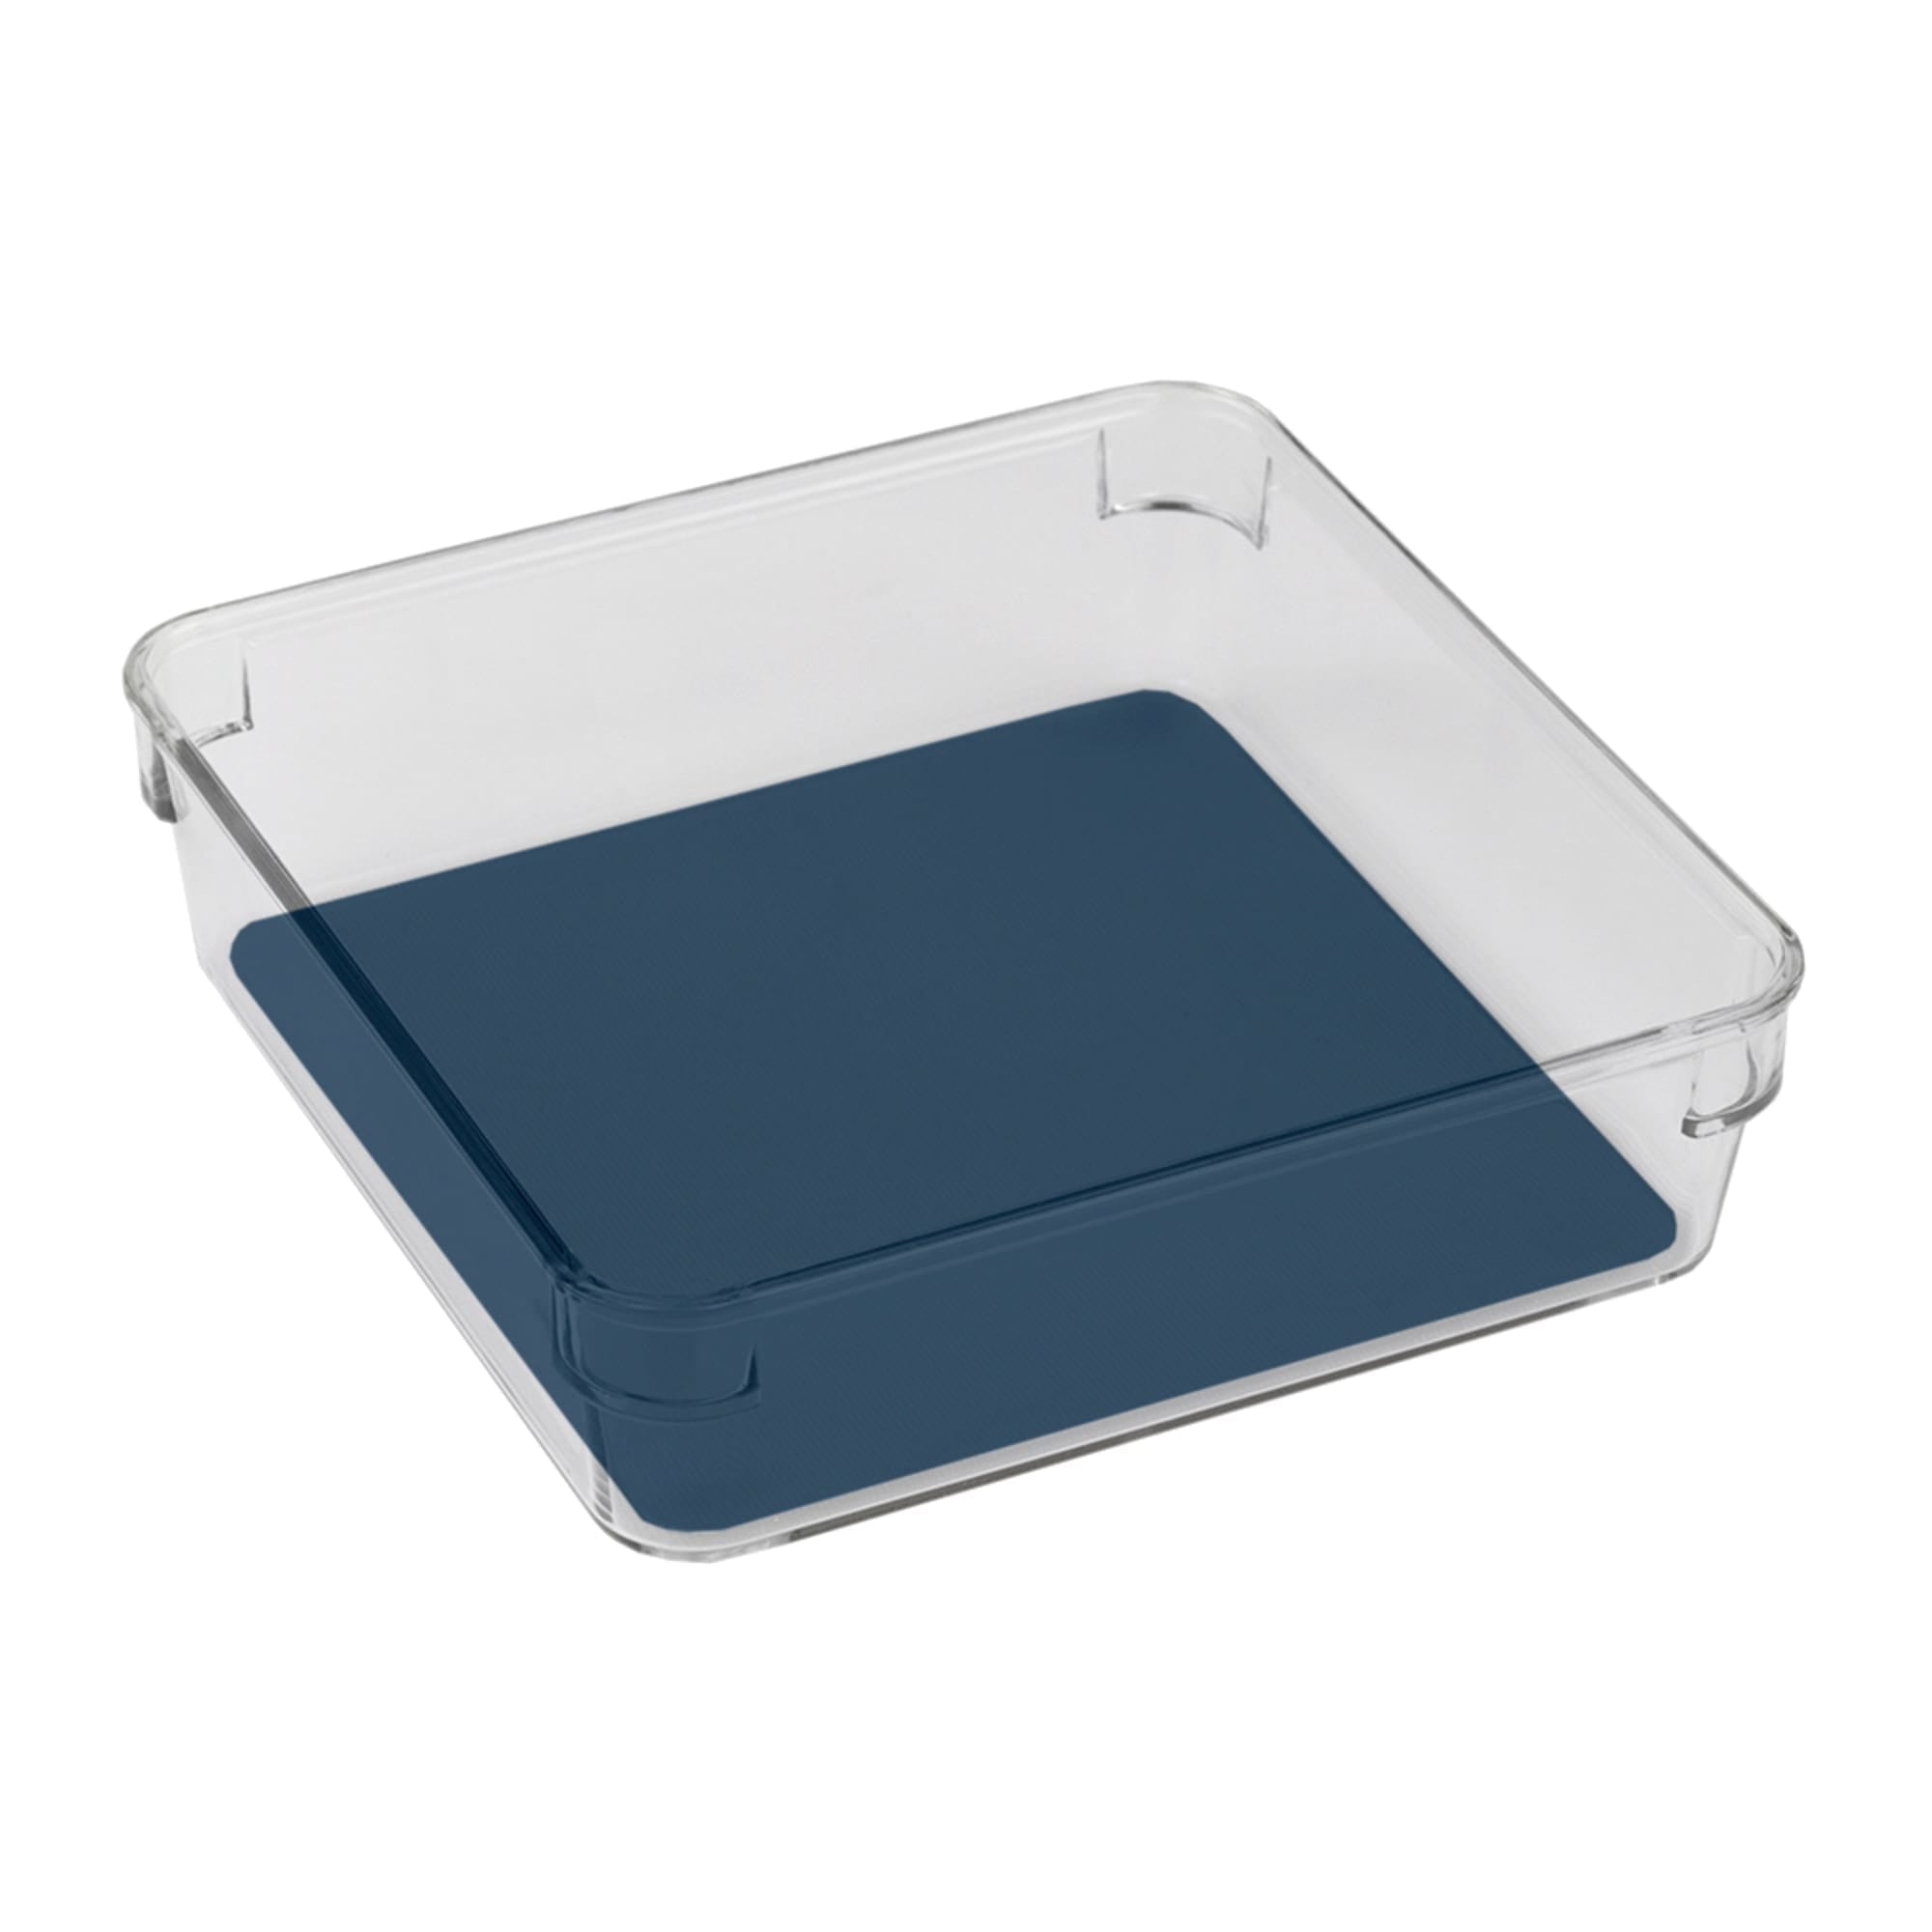 Michael Graves Design 6.5" x 6.5" Drawer Organizer with Indigo Rubber Lining $2.00 EACH, CASE PACK OF 24